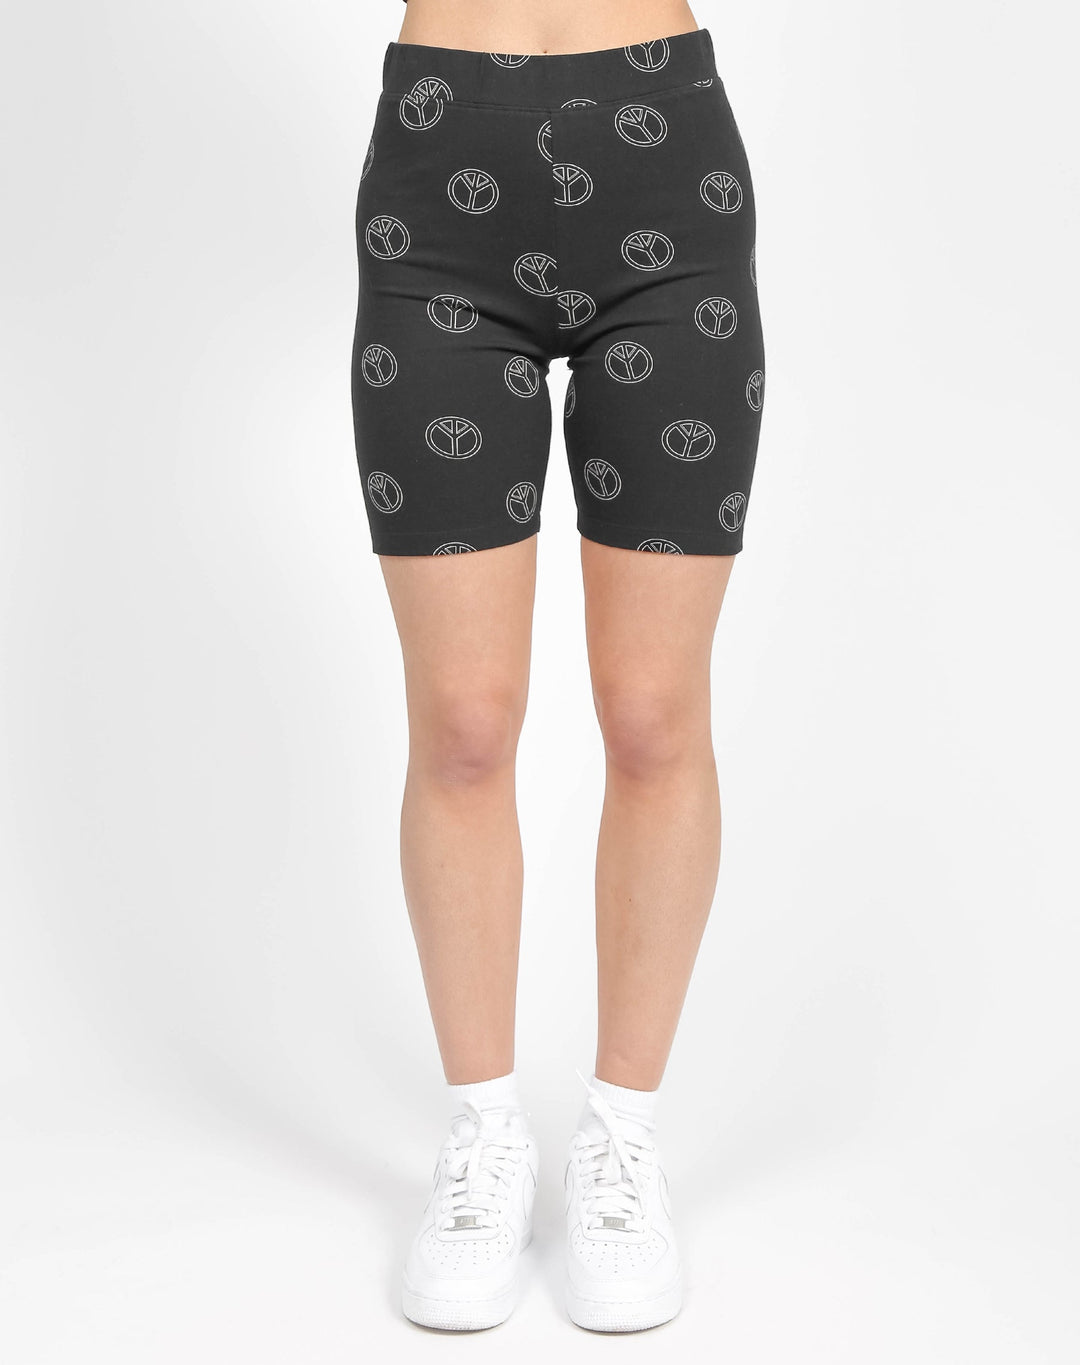 The PEACE SIGN Biker Shorts - Black – Clementine Home Floral Gift